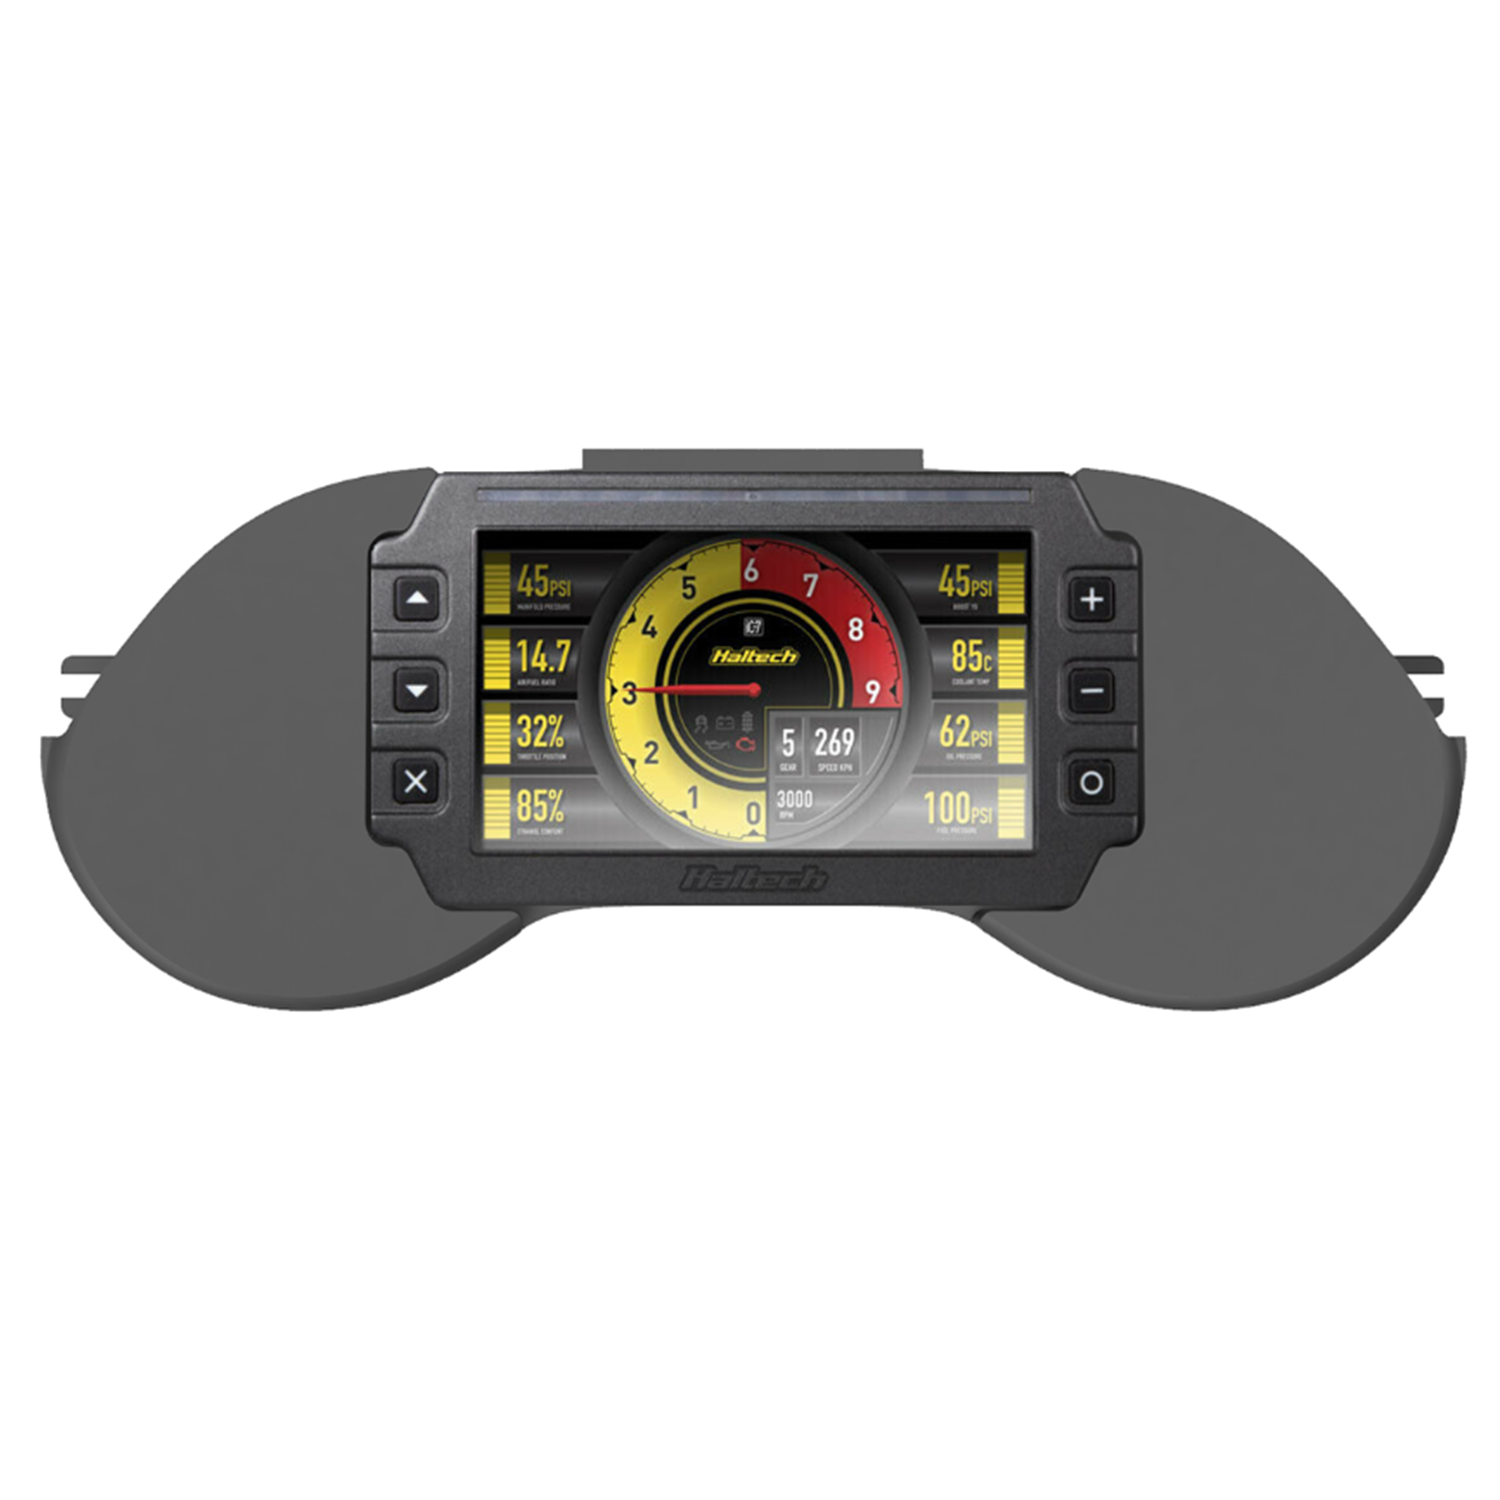 Toyota Supra Mk4 Series 2 97-02 Recessed Dash Mount for the Haltech iC-7 (display not included)